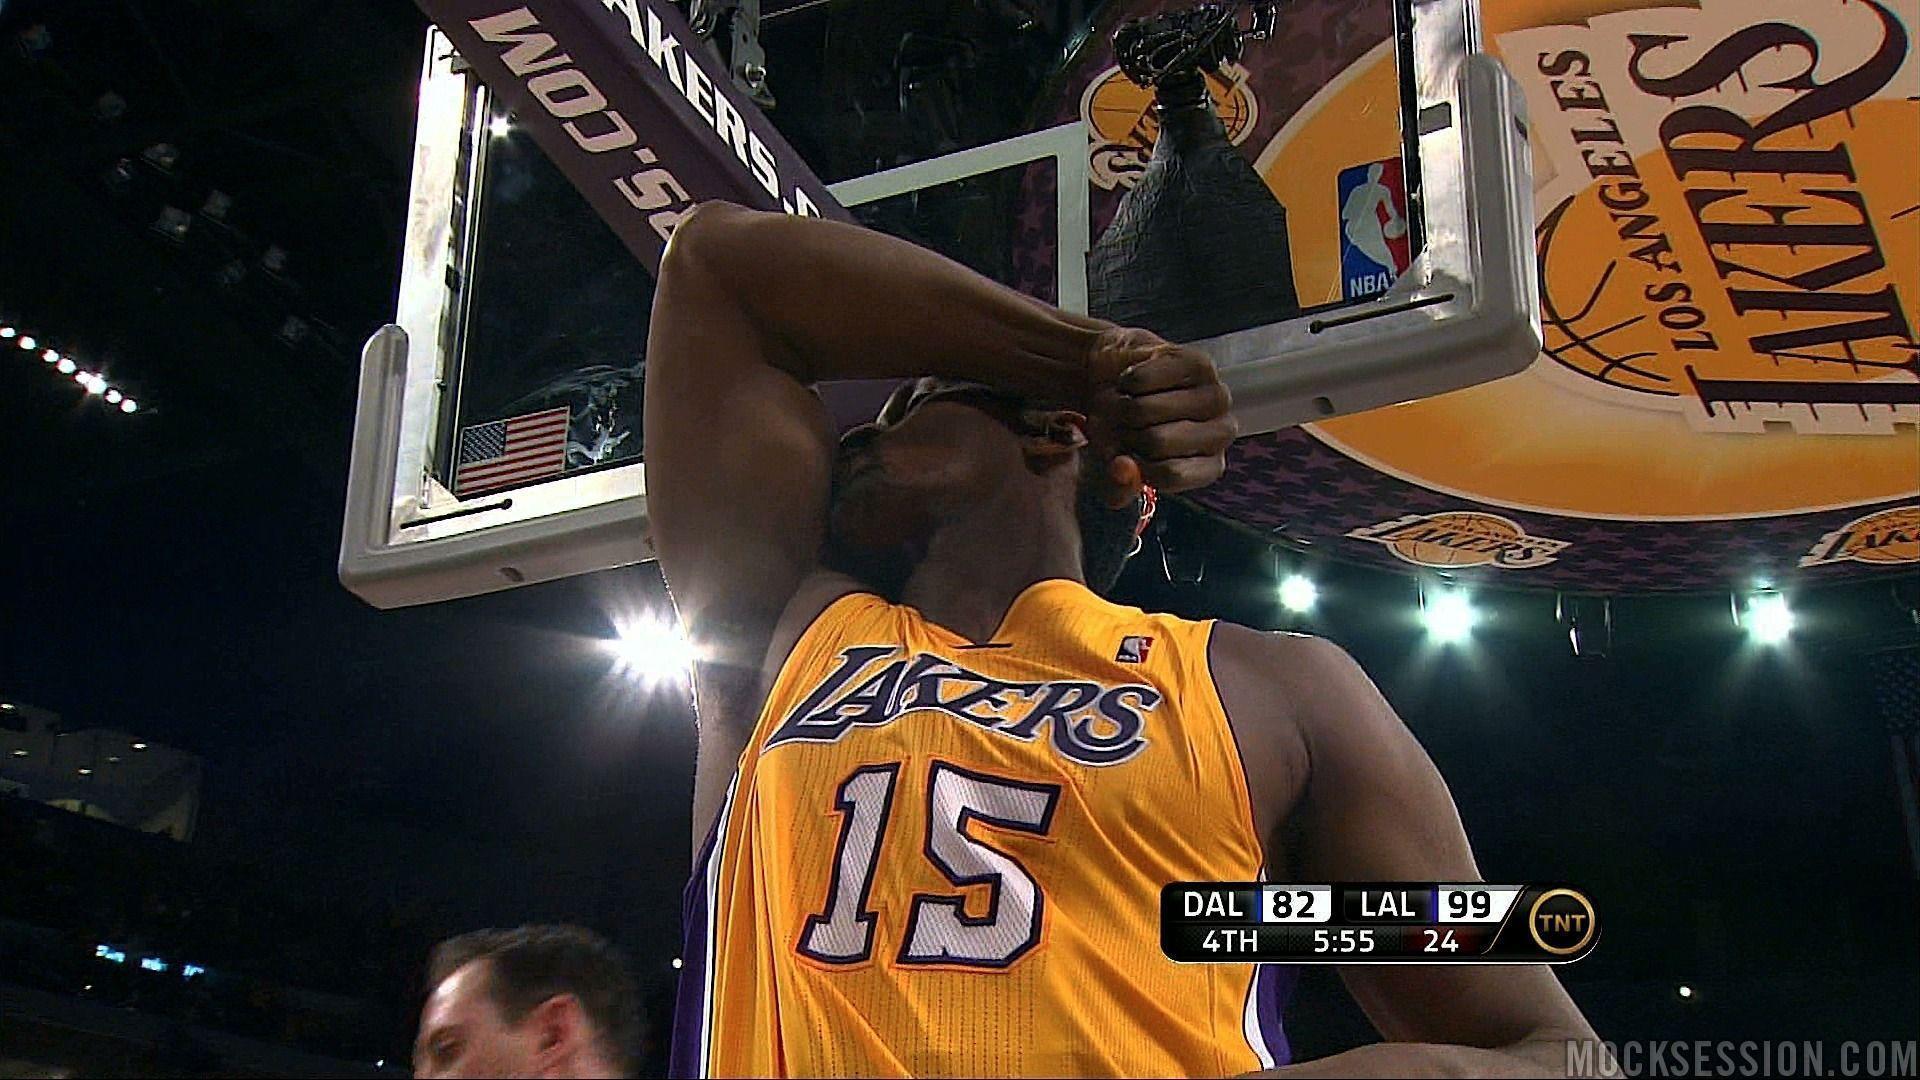 Video: Ron Artest reminds us that he is strong, the best